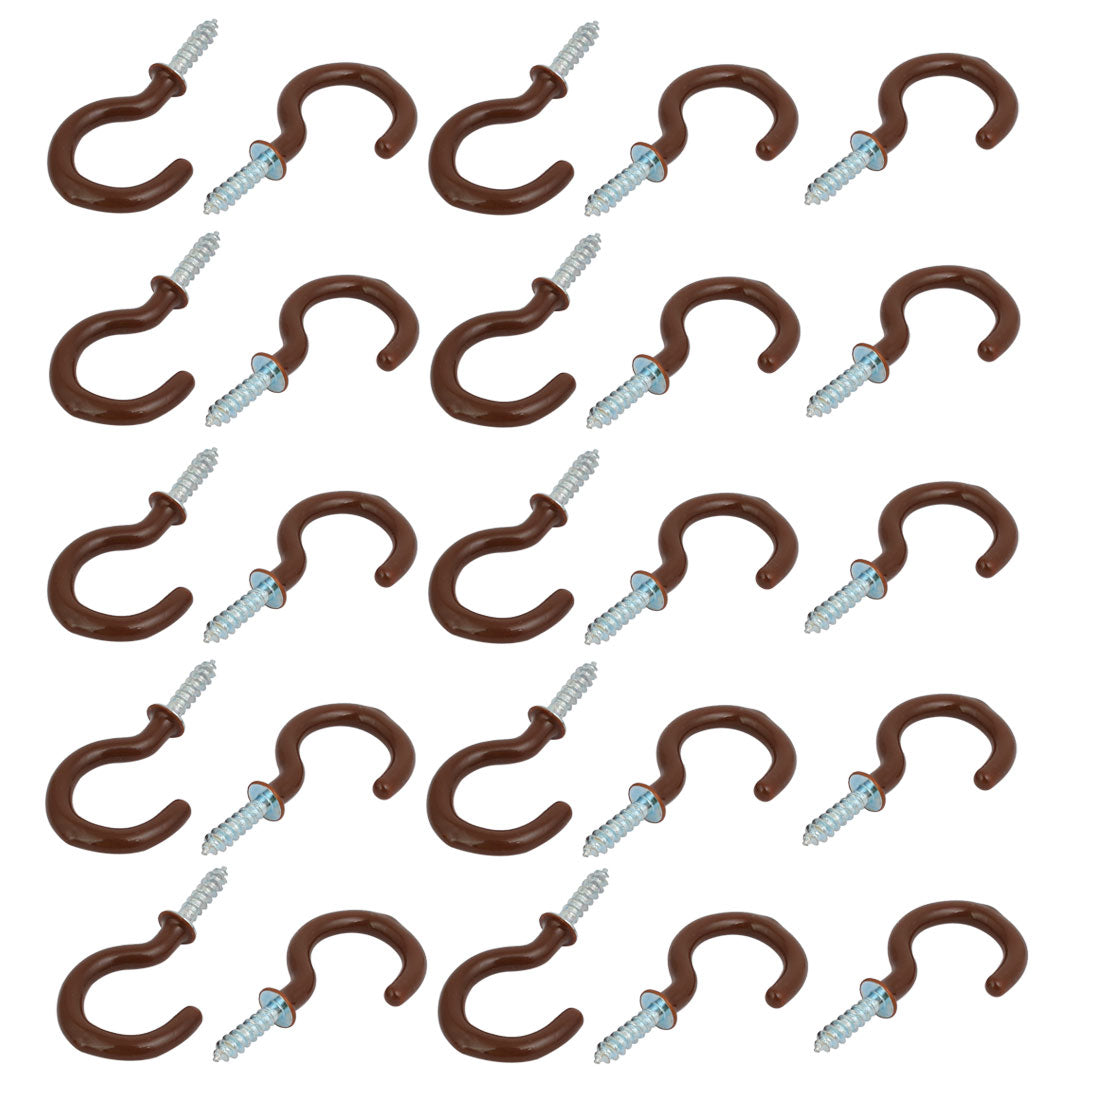 uxcell Uxcell 1 Inch Plastic Coated Screw-in Open Cup Ceiling Hooks Hangers Brown 25pcs